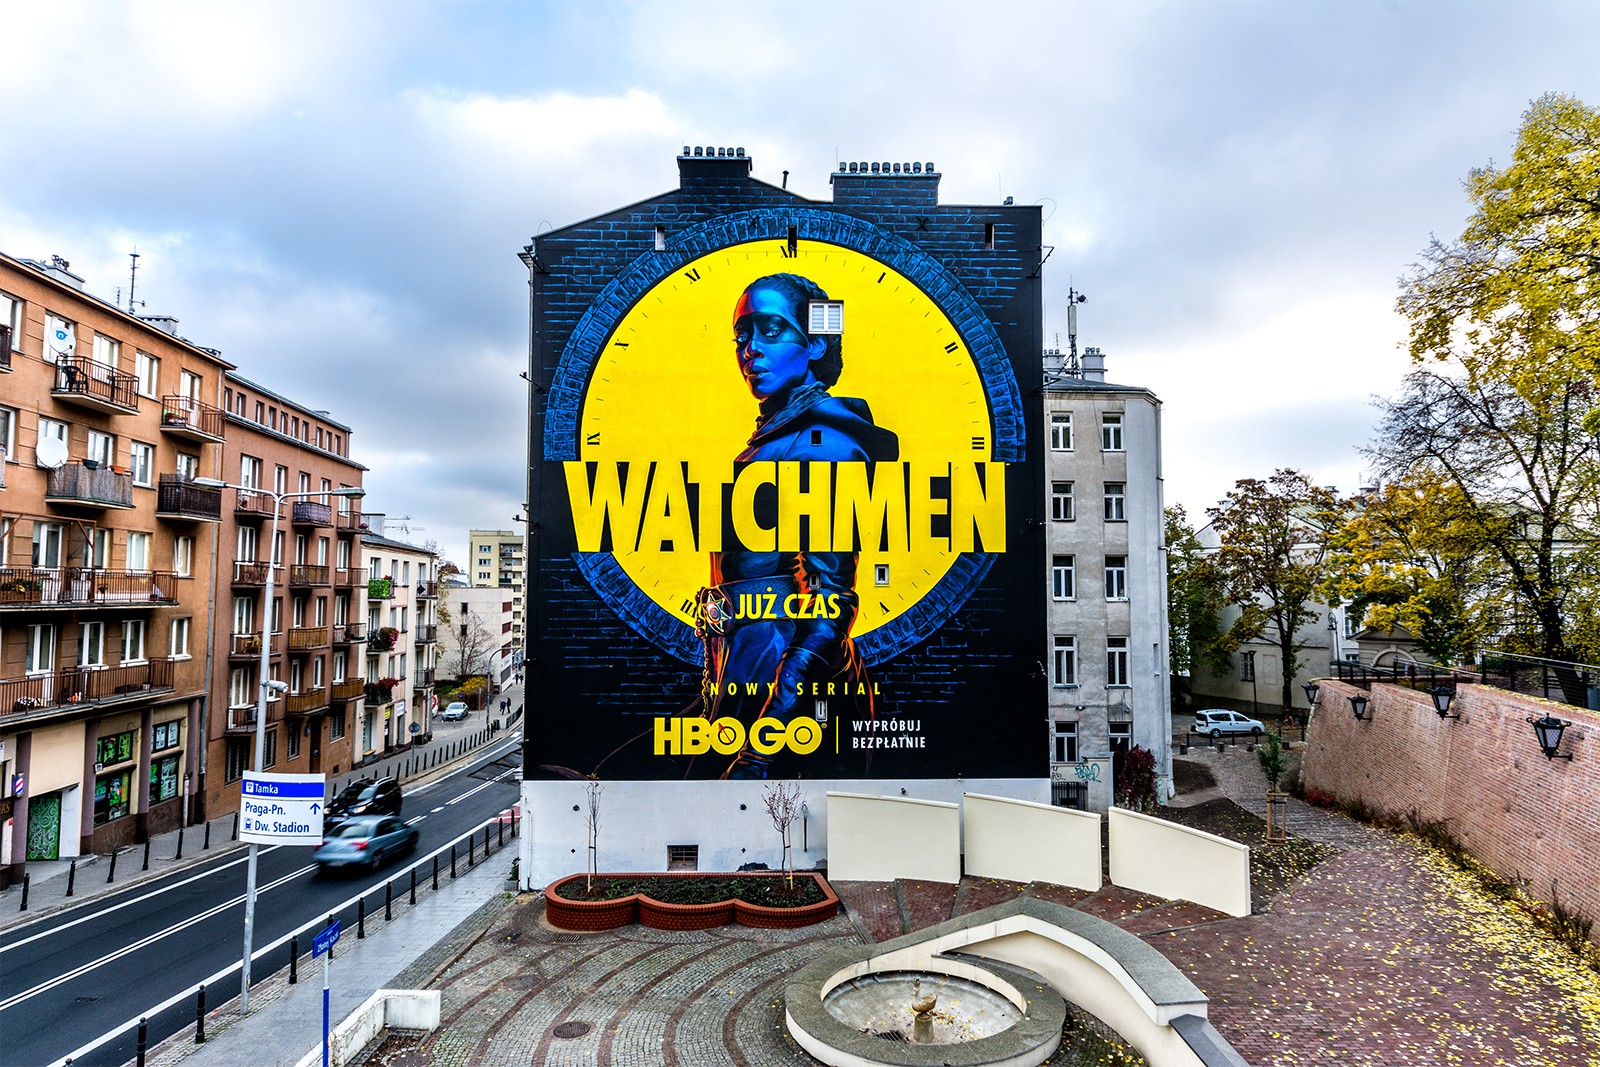 Daily version of promotional Watchman mural for HBO GO | Watchman | Portfolio